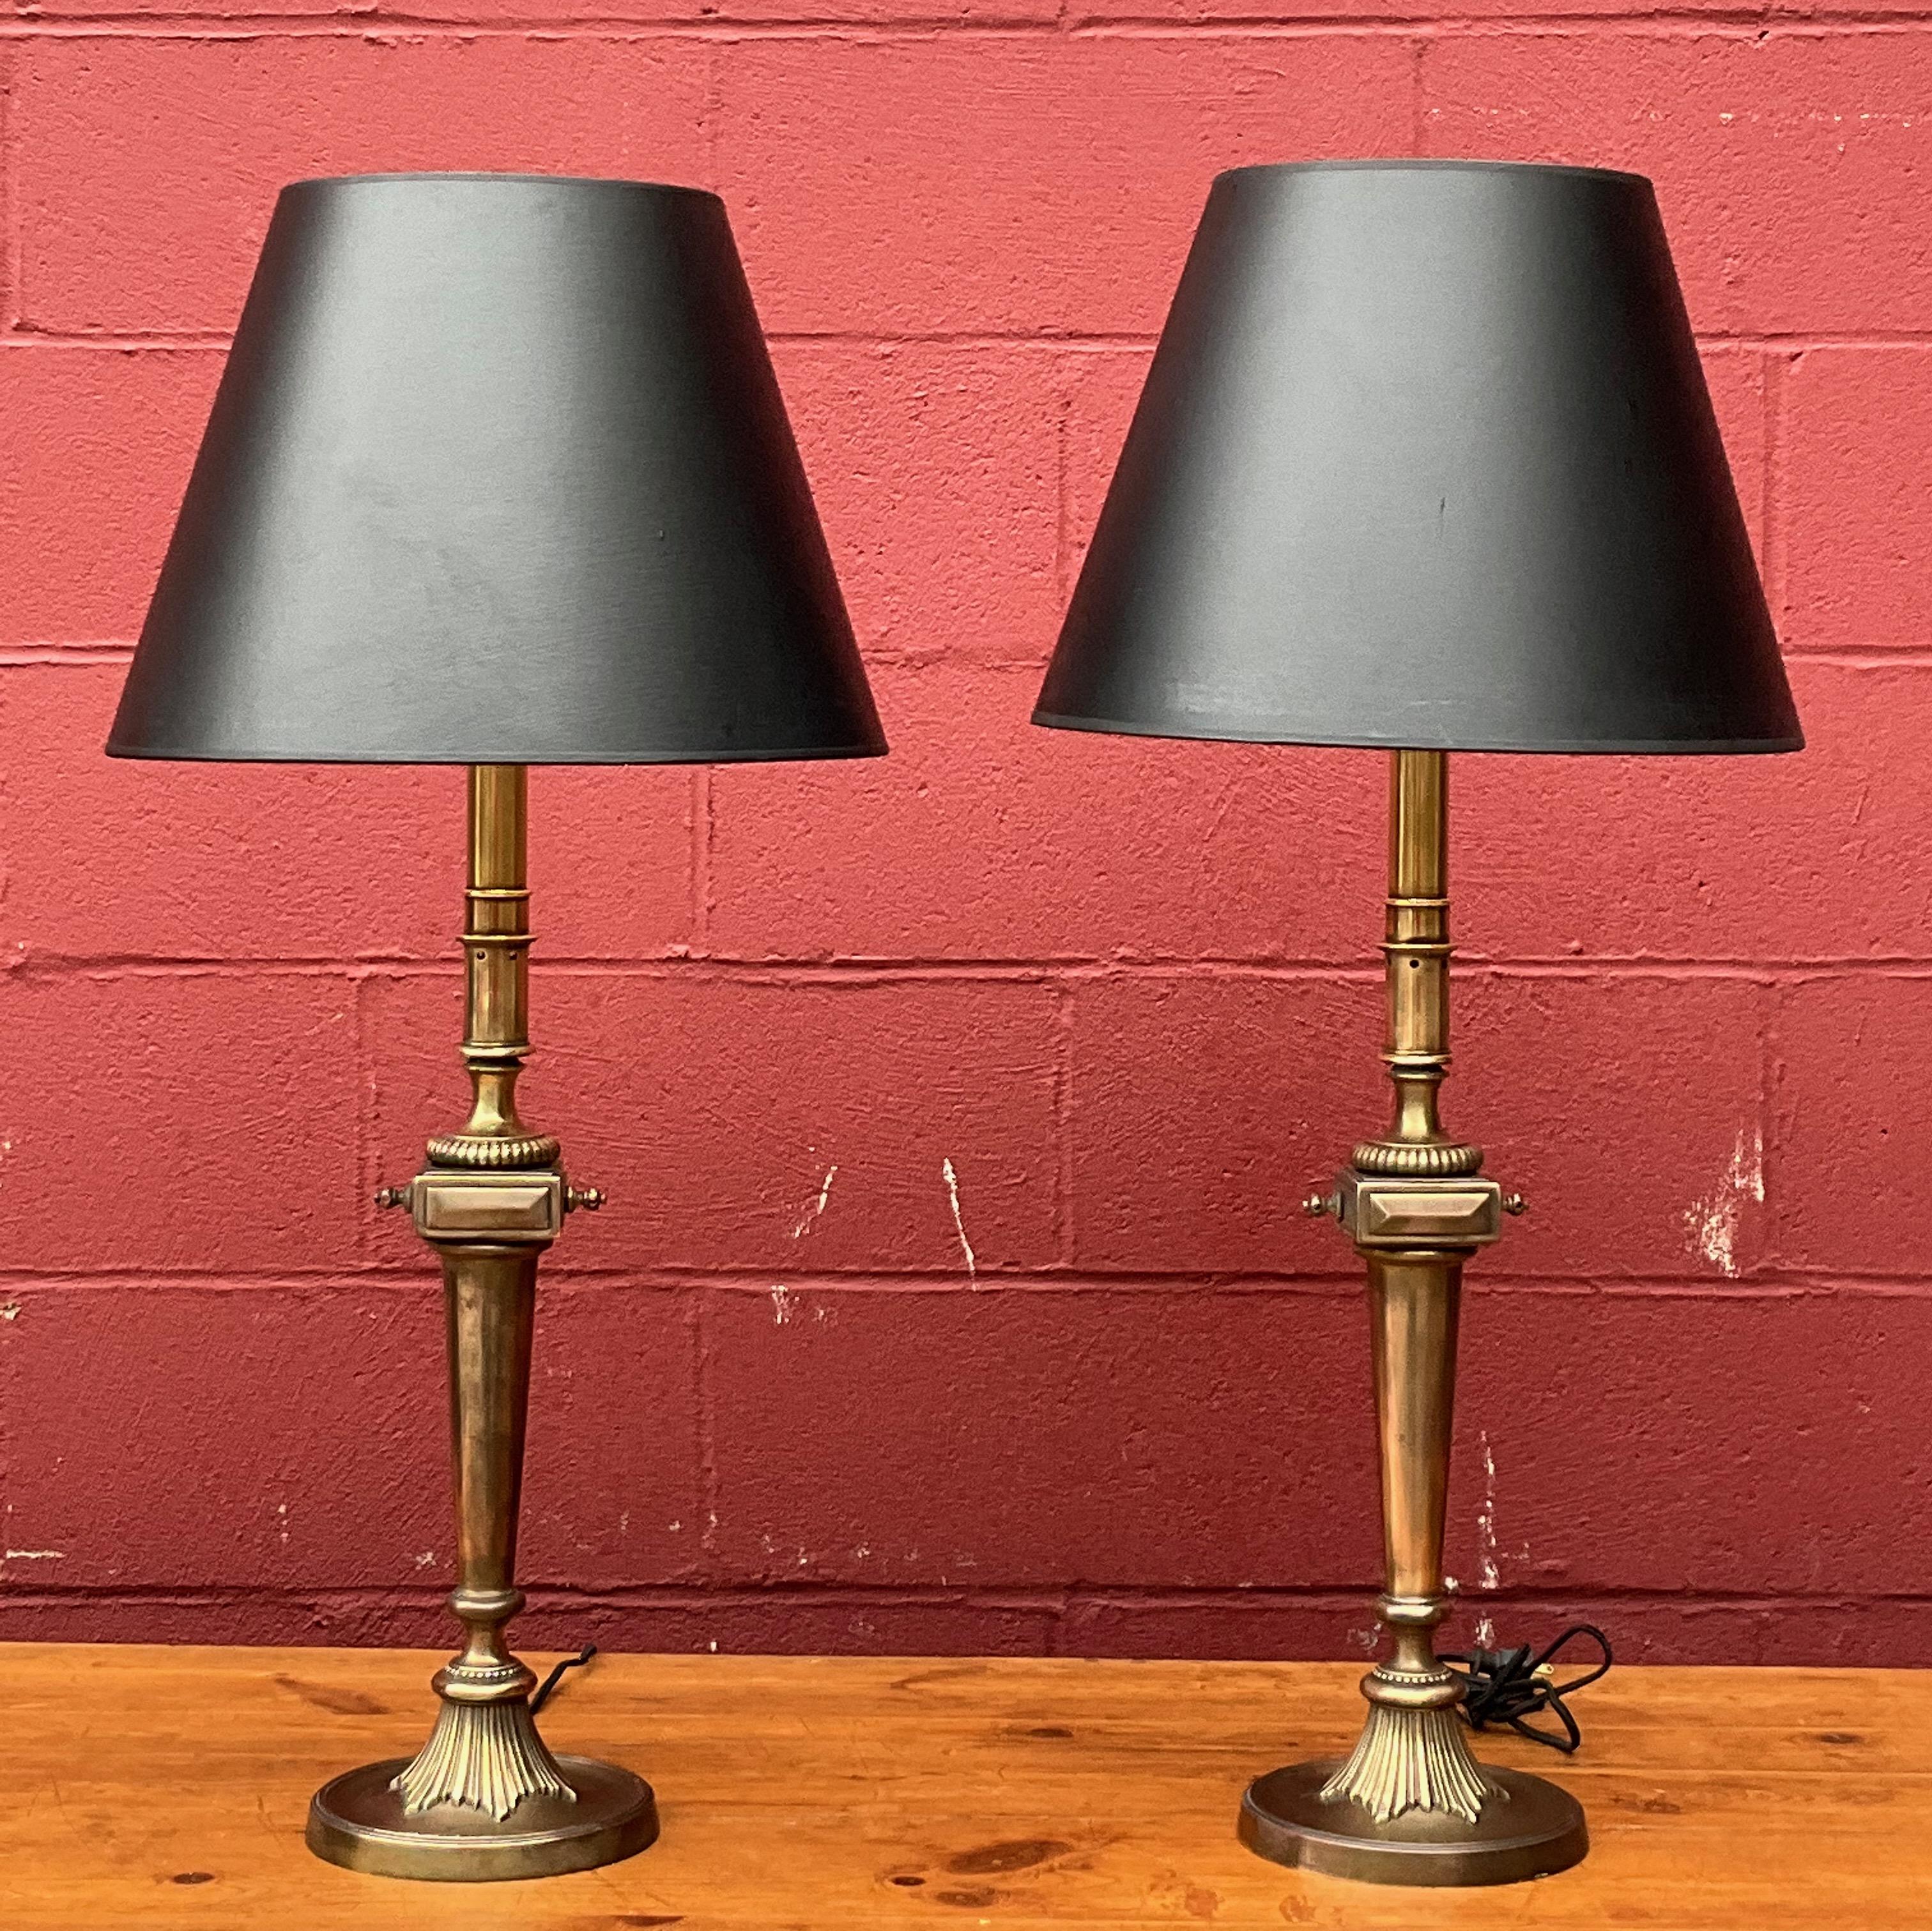 Introducing a well-made pair of American Neoclassical brass table lamps from the 1950s with an English brass finish, that have been recently rewired for optimal functionality. These lamps exhibit a charming patina, showcasing their age and